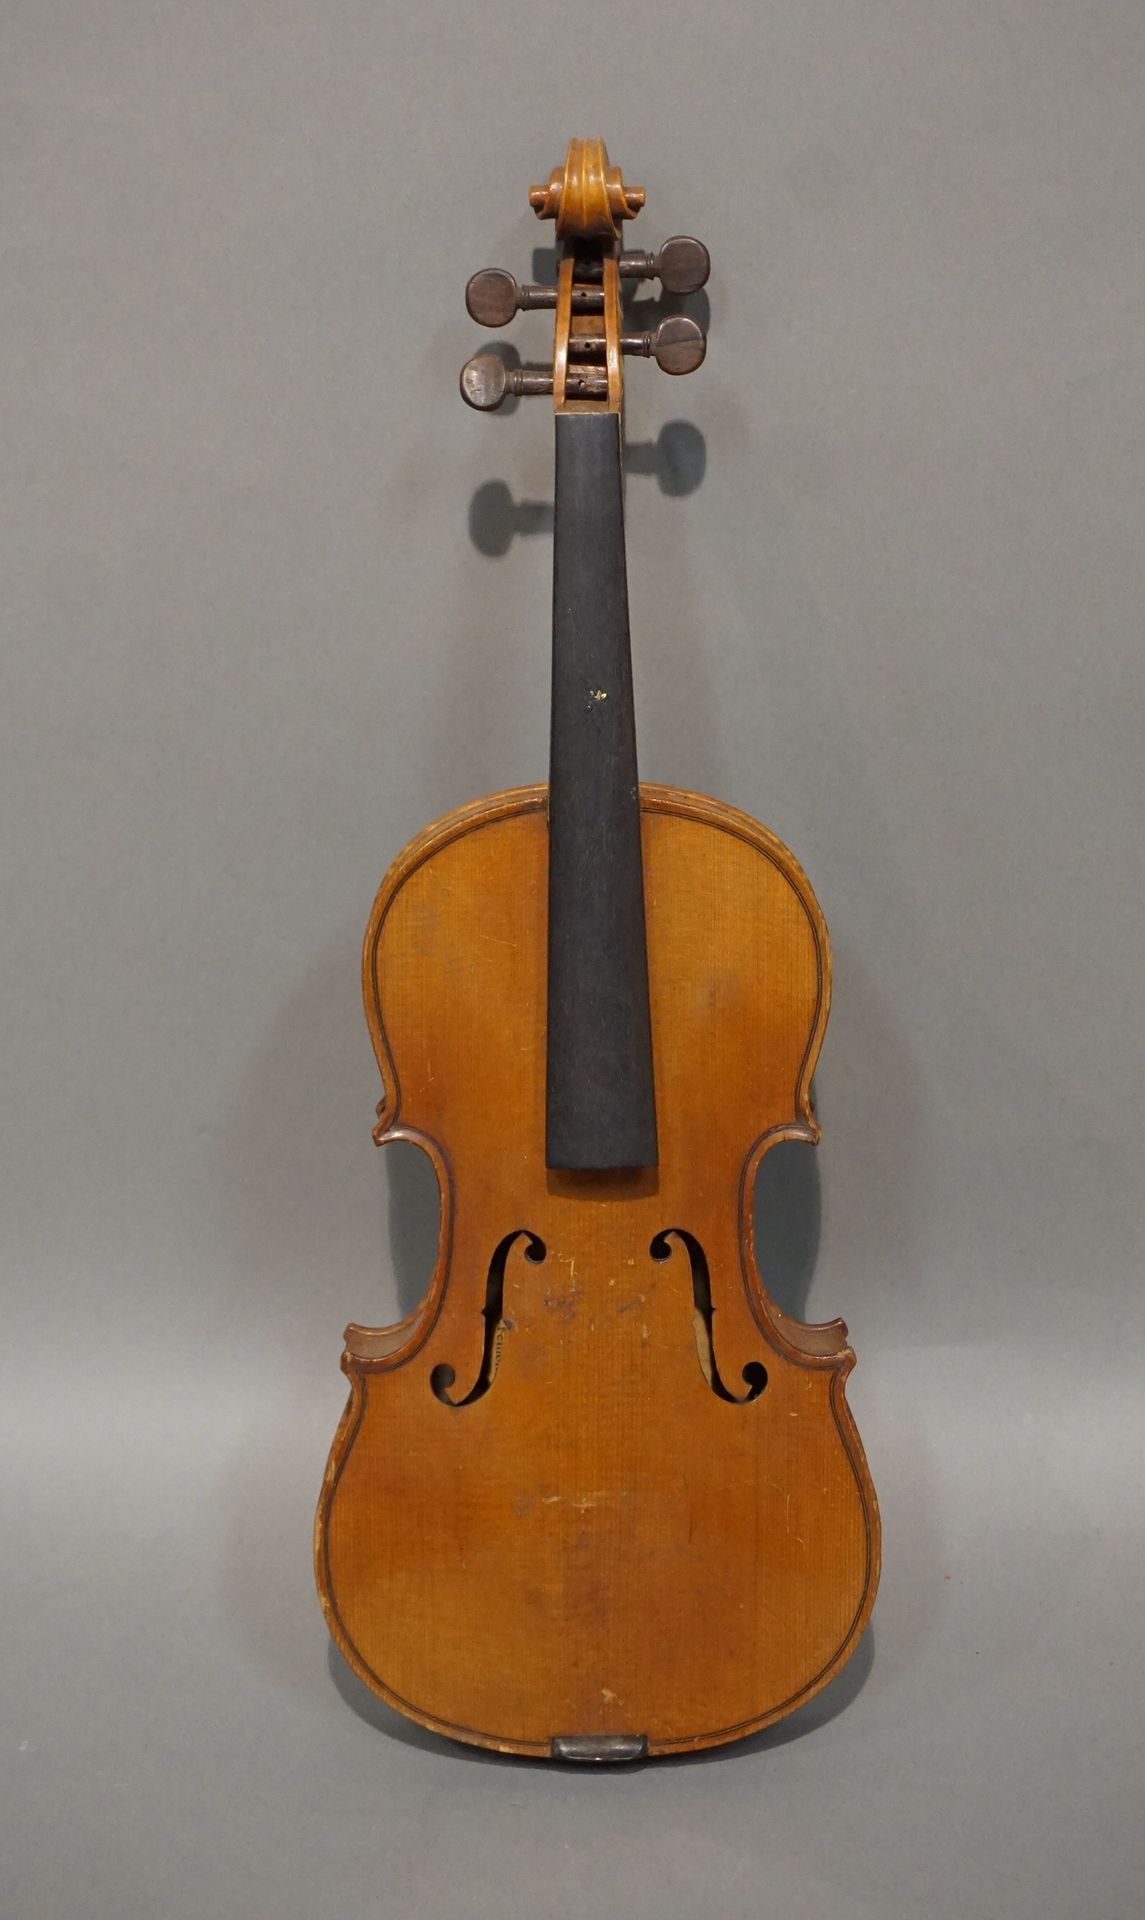 Null Violin 1/2 made in Mirecourt in the XXth century with an apocryphal Stradiv&hellip;